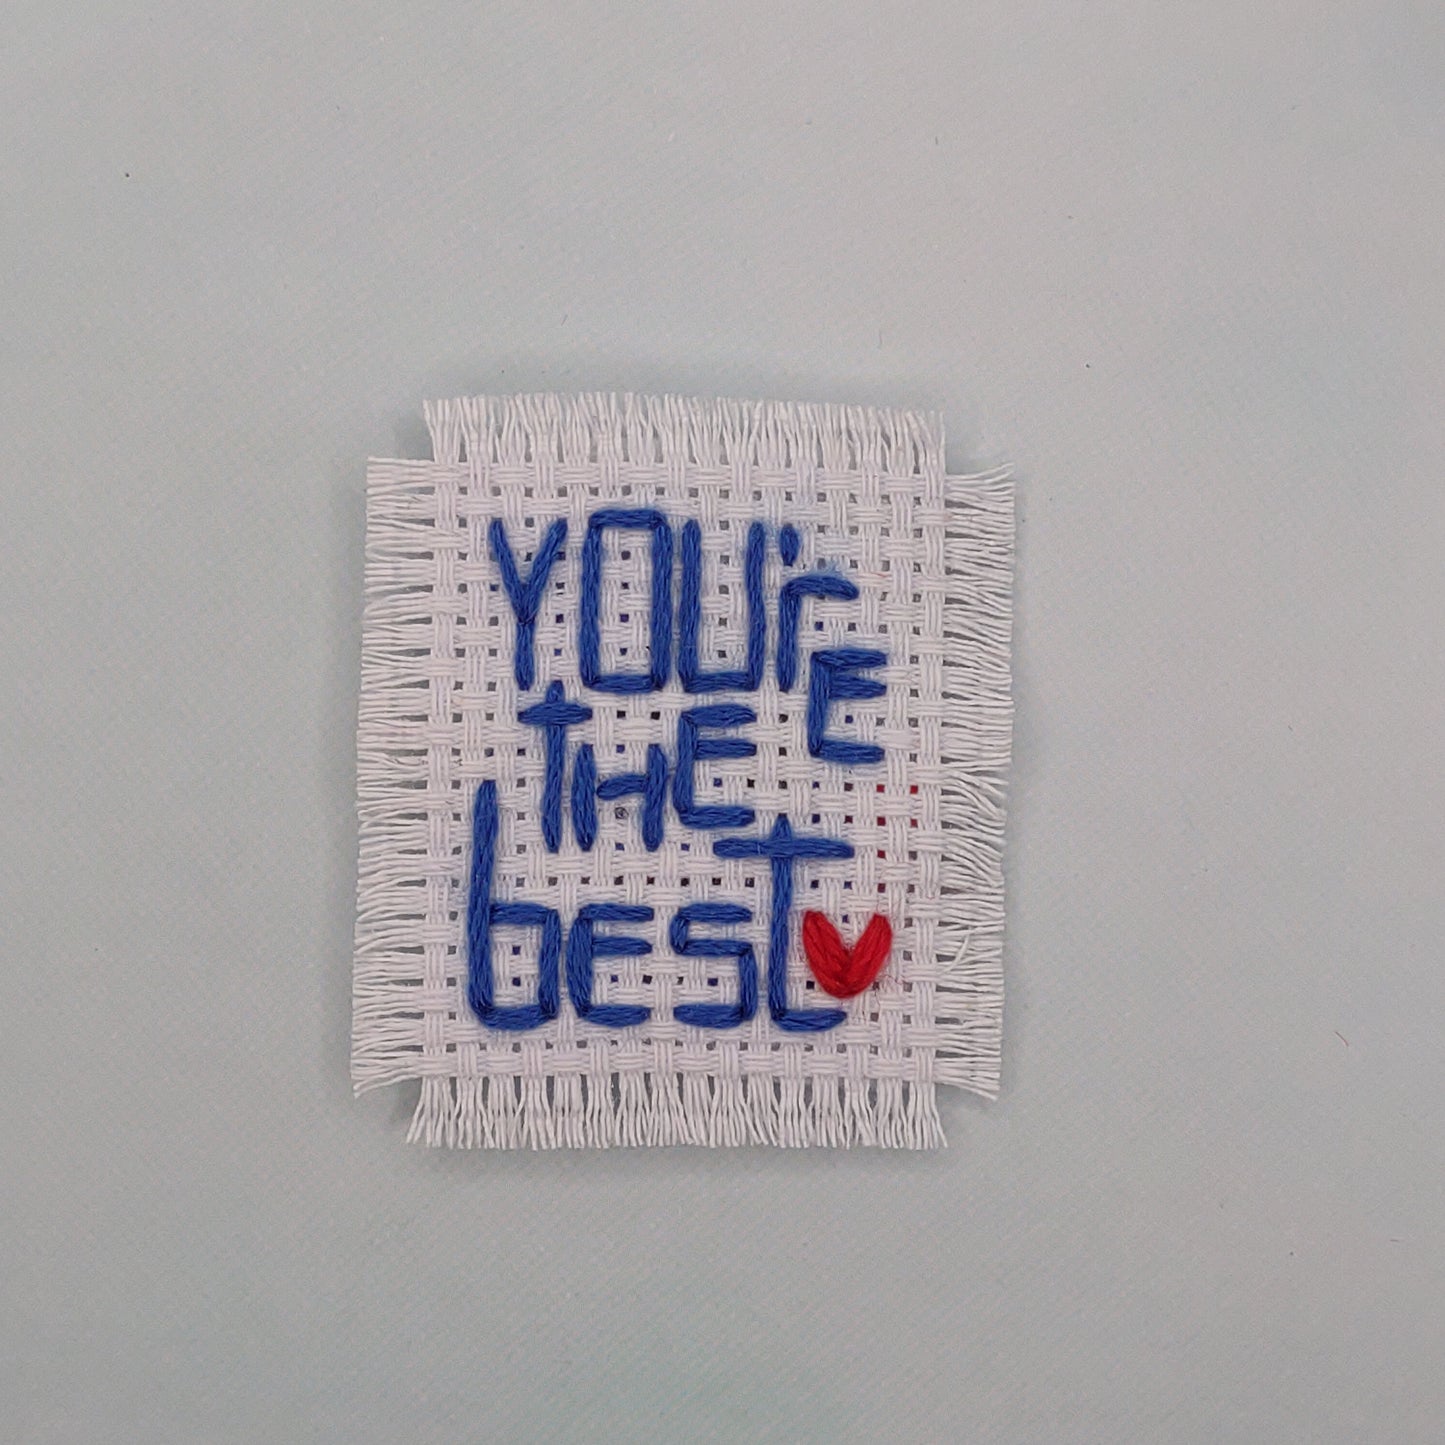 You are the best -Caring Magnets- Handmade Embroidery